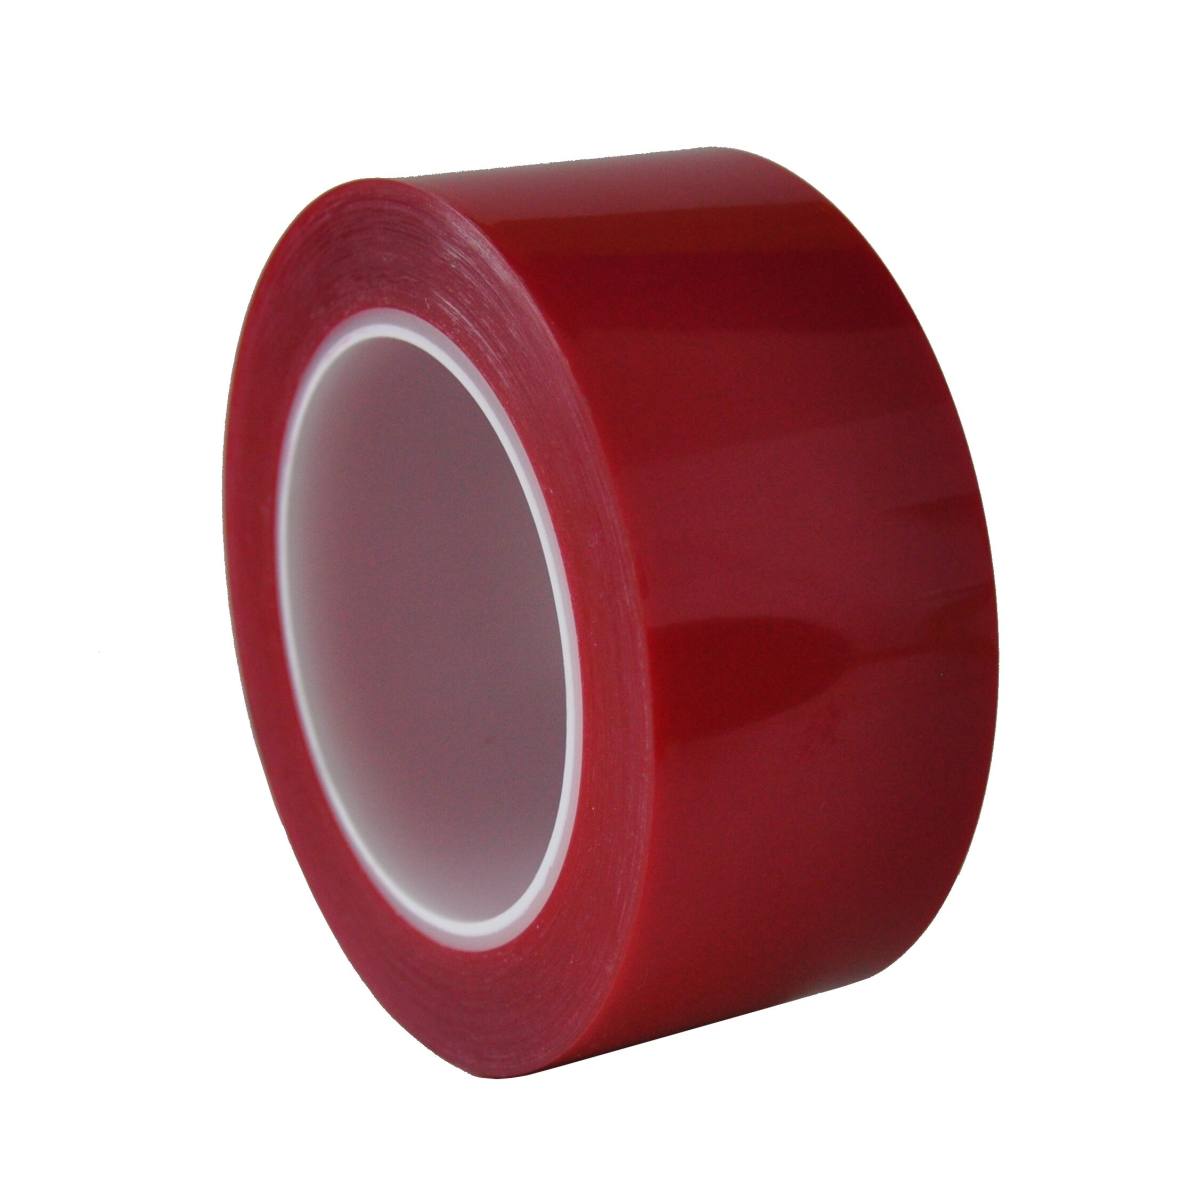 S-K-S 208R polyester plakband, 100mmx66m, rood